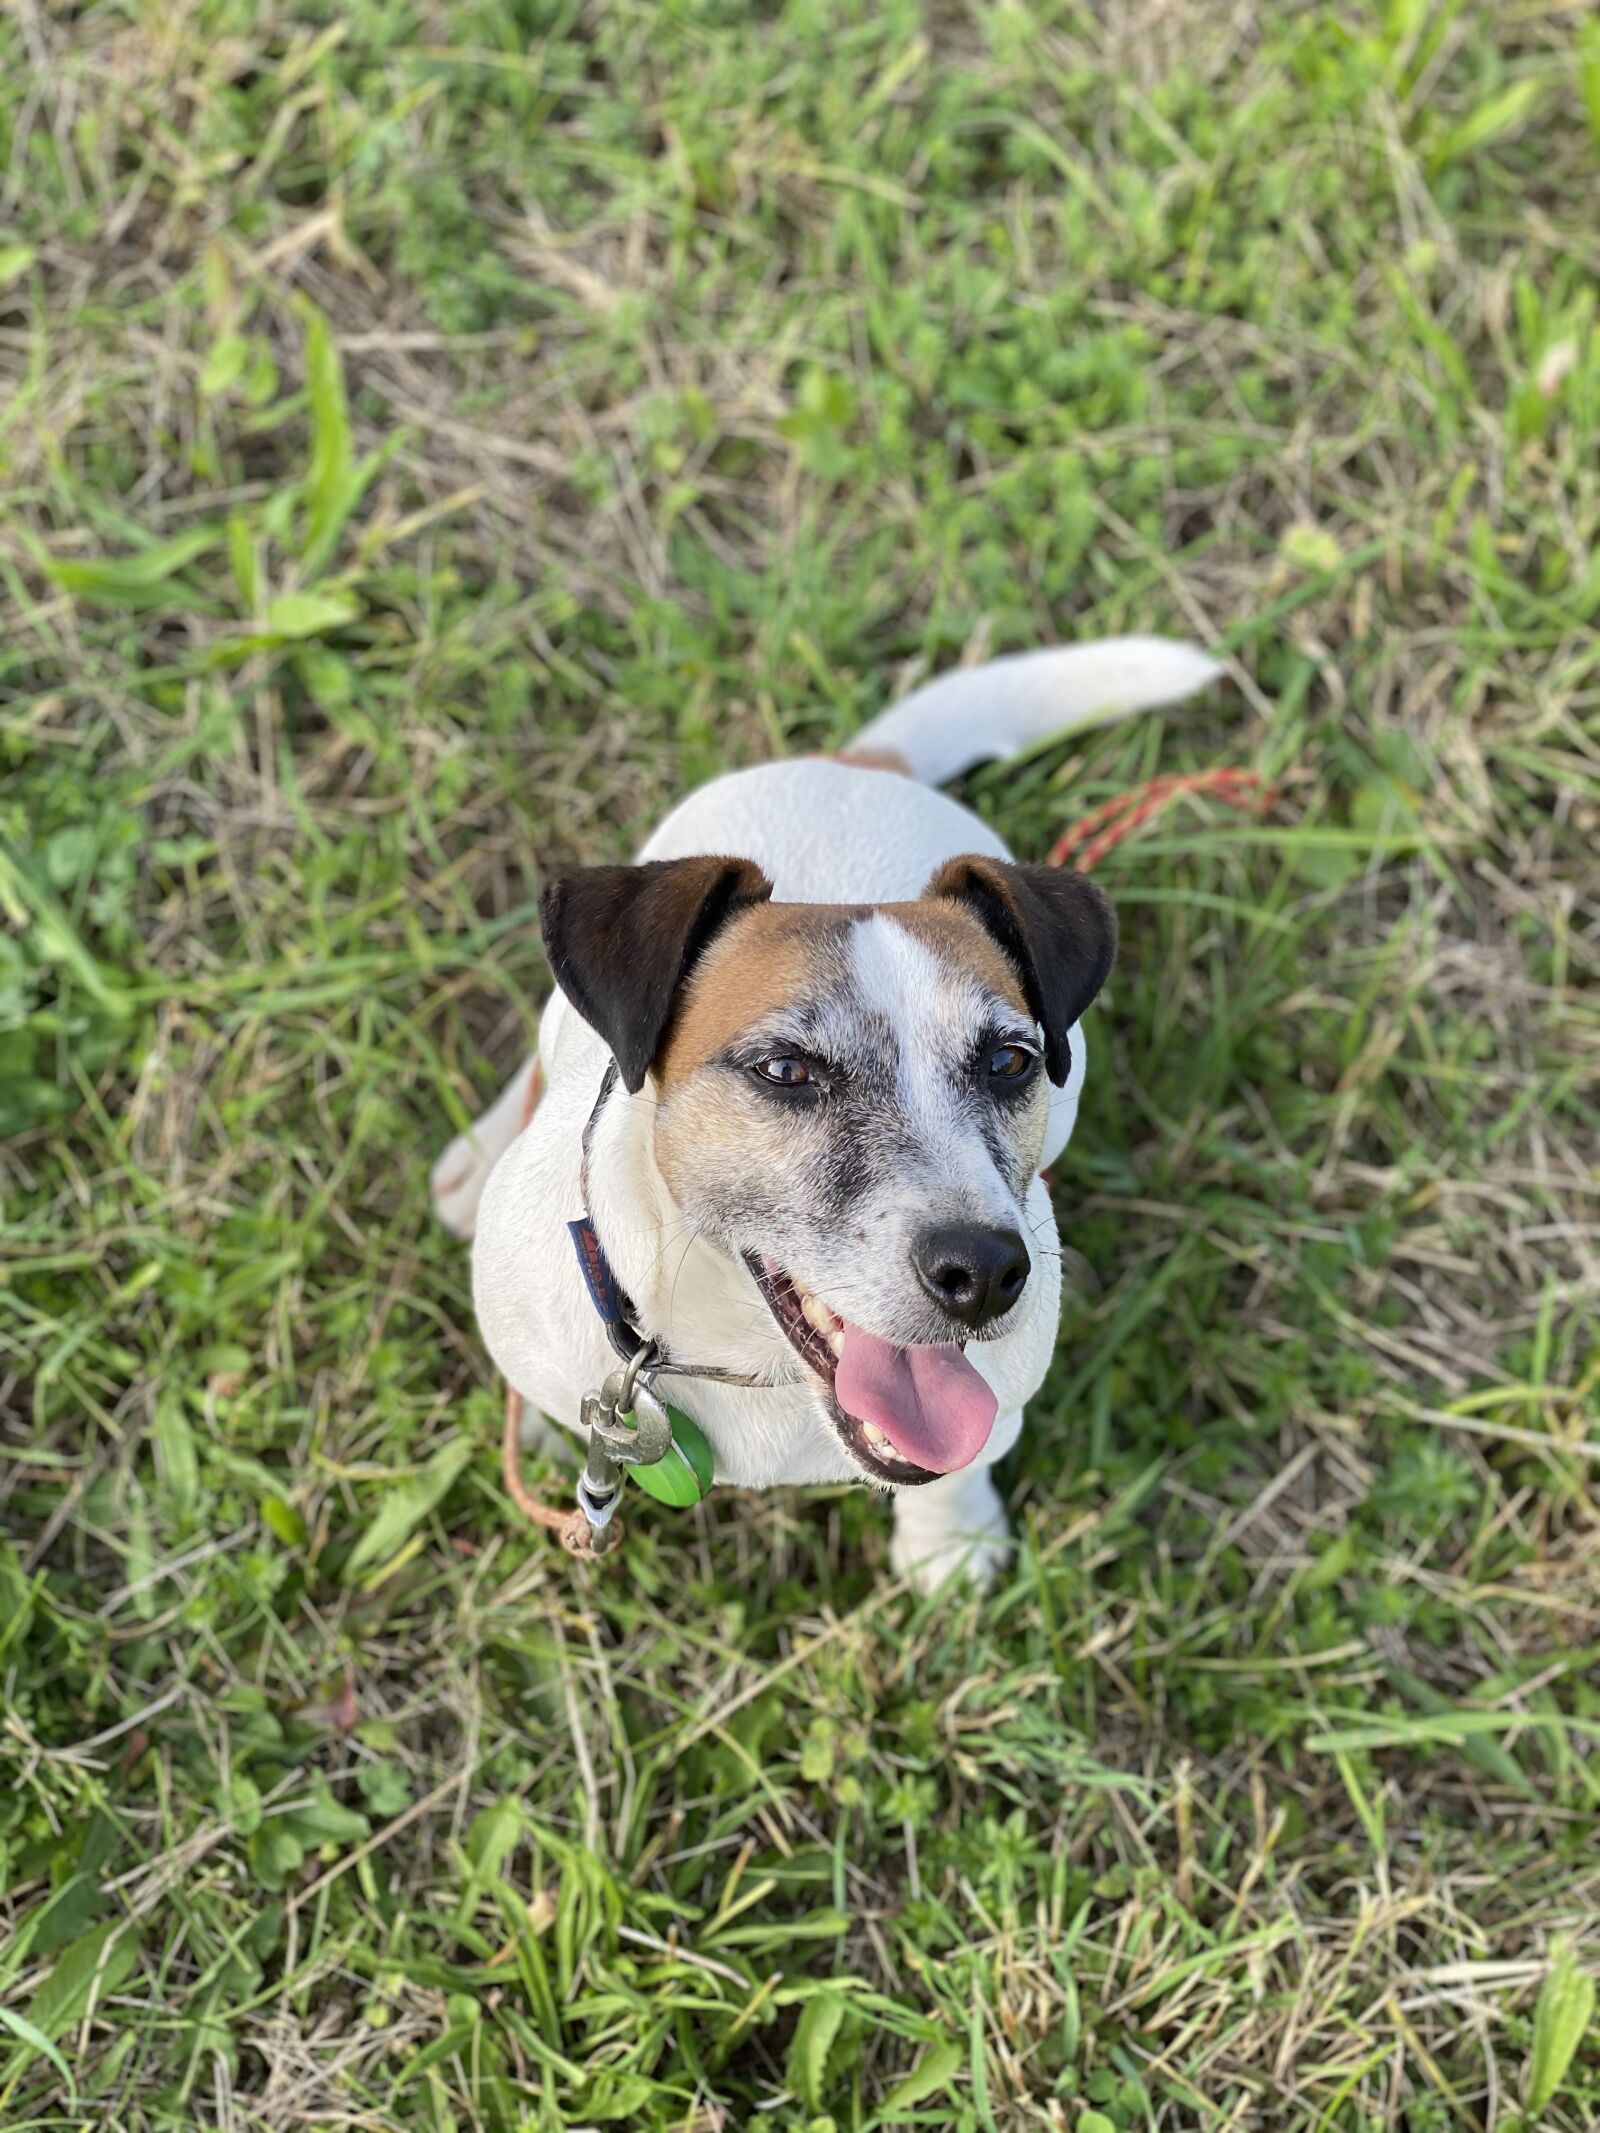 iPhone 11 Pro back dual camera 6mm f/2 sample photo. Jack russell terrier, dog photography